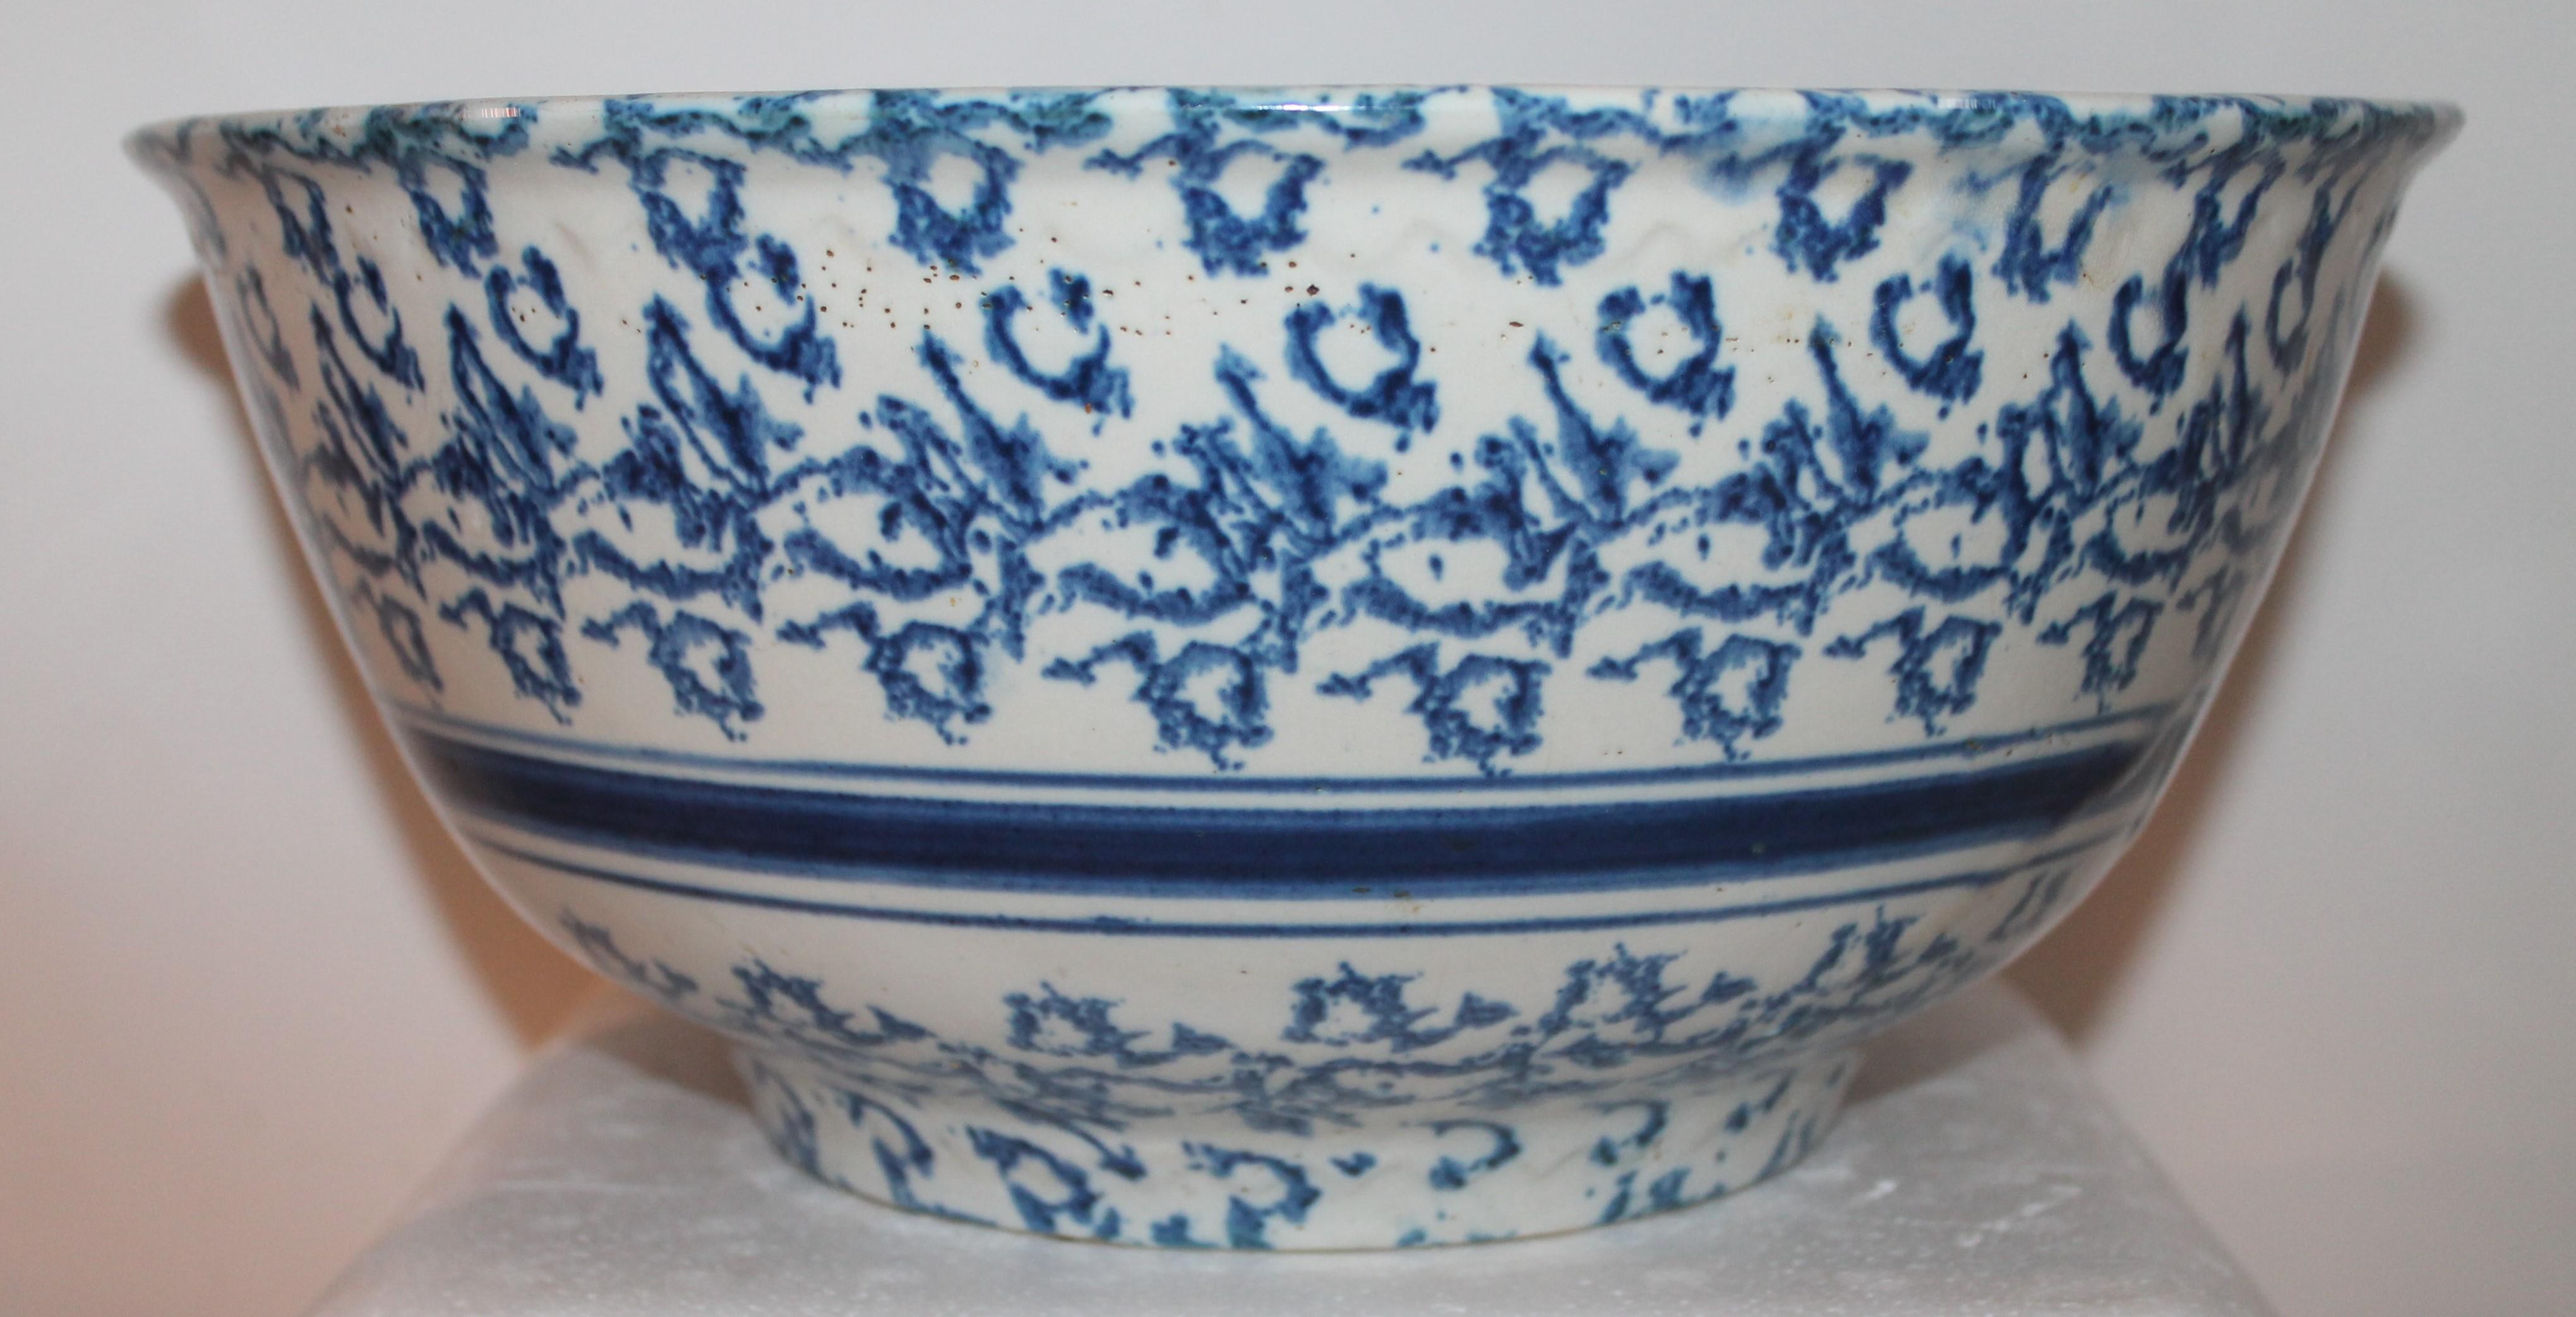 This large mixing bowl is most unusual and the size is very large. Great as a fruit bowl. Condition is very good.